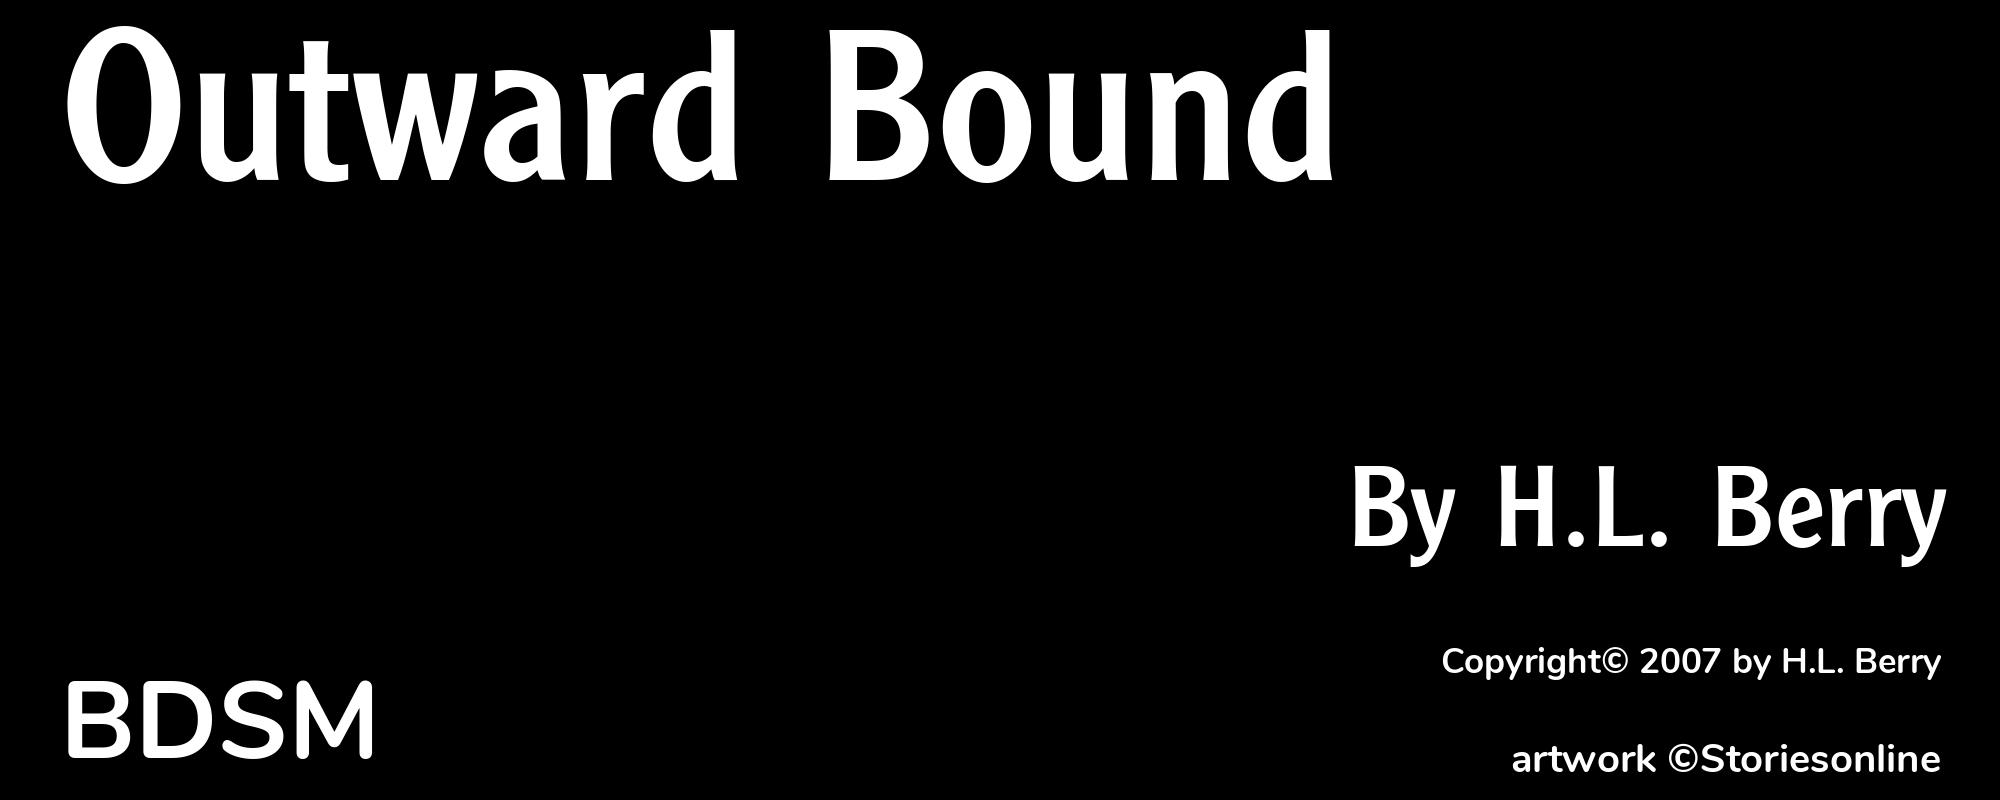 Outward Bound - Cover